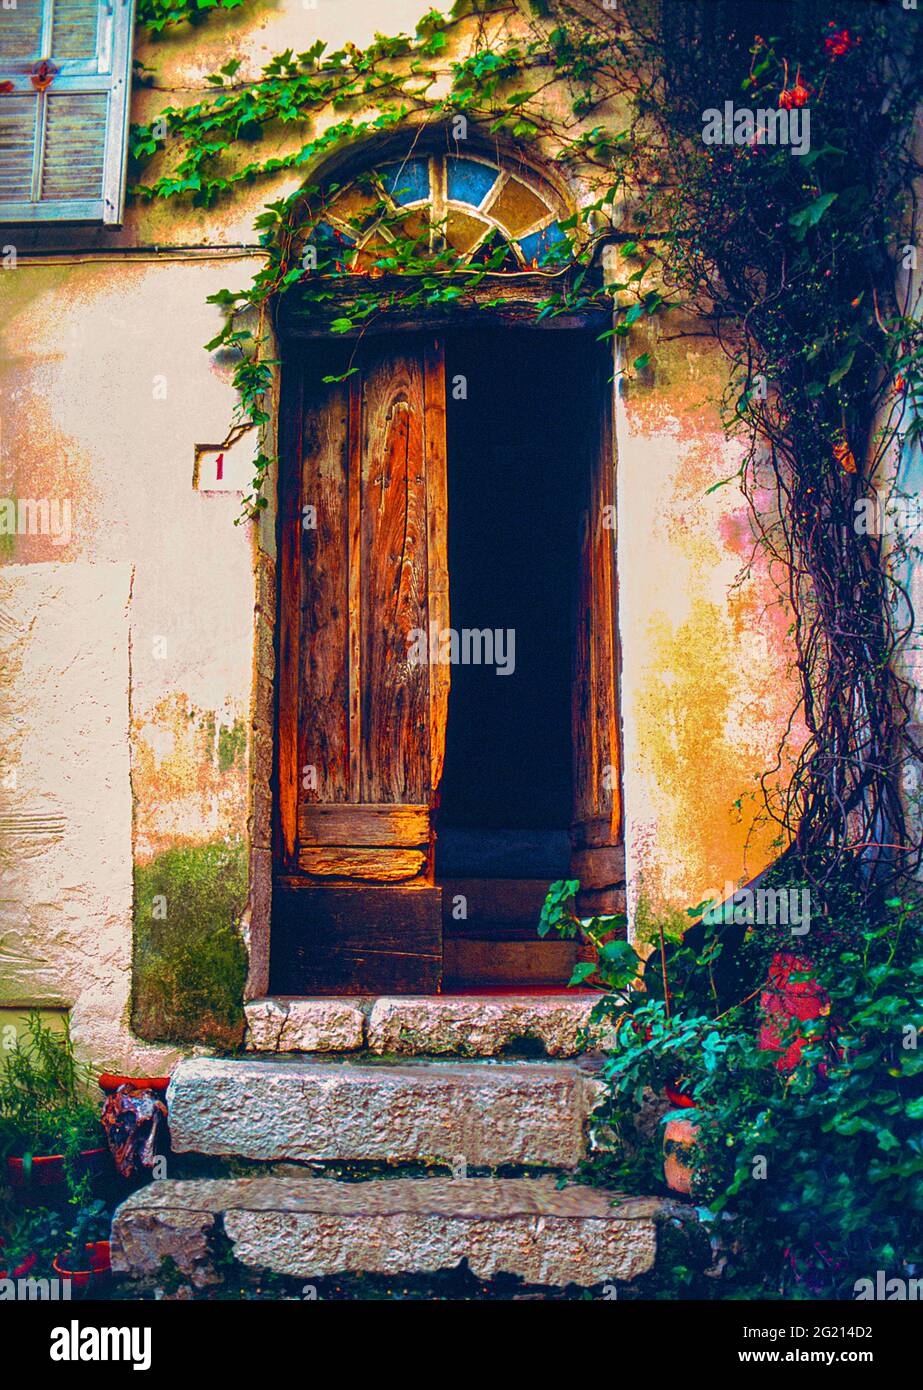 Image of a Medieval Door in the center of the old village of La Turbie, France Stock Photo